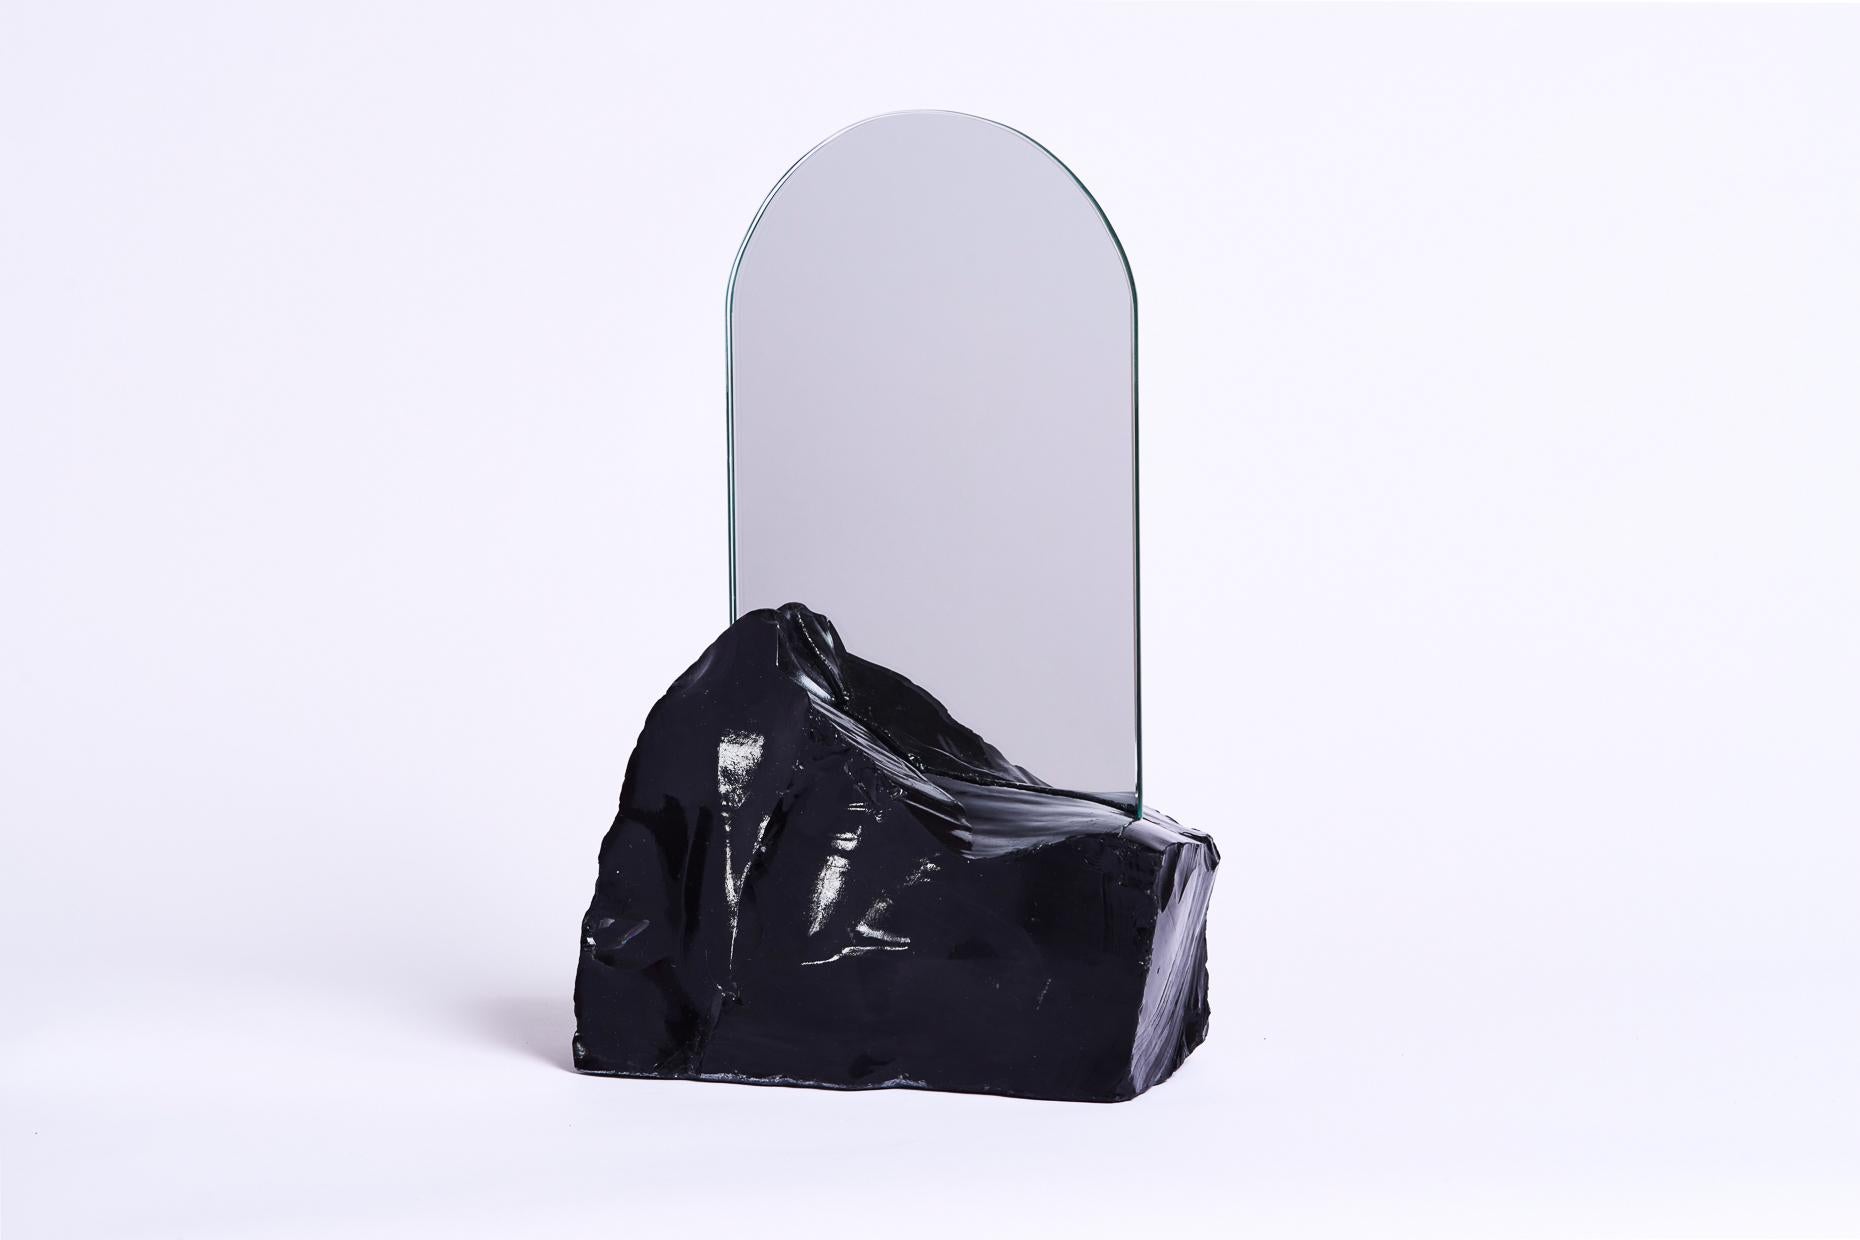 American Aura Mirror by Another Human, Contemporary Crystal Vanity Mirror in Obsidian